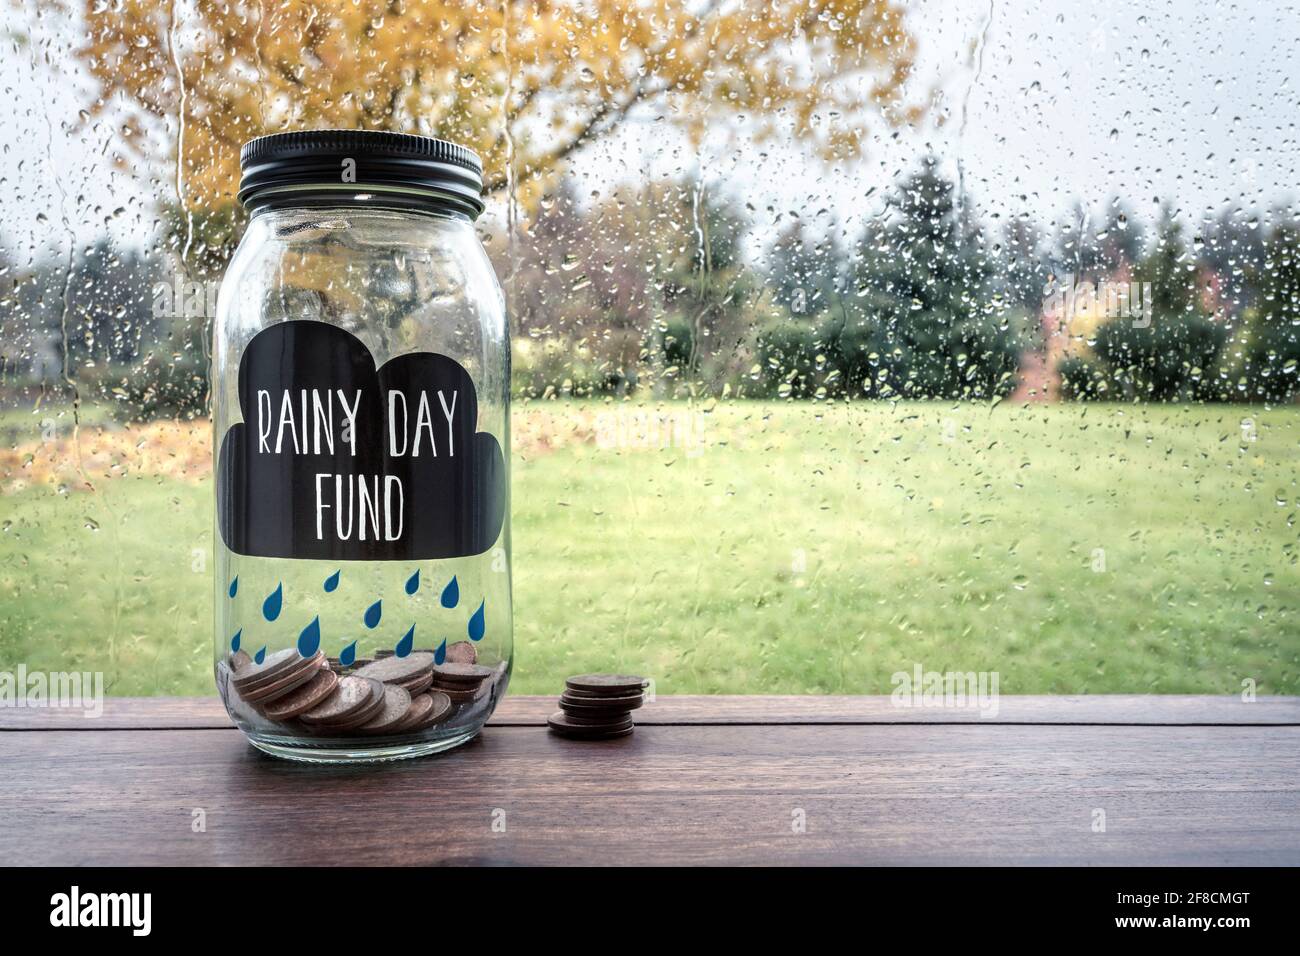 Savings for a rainy day fund glass jar with money Stock Photo